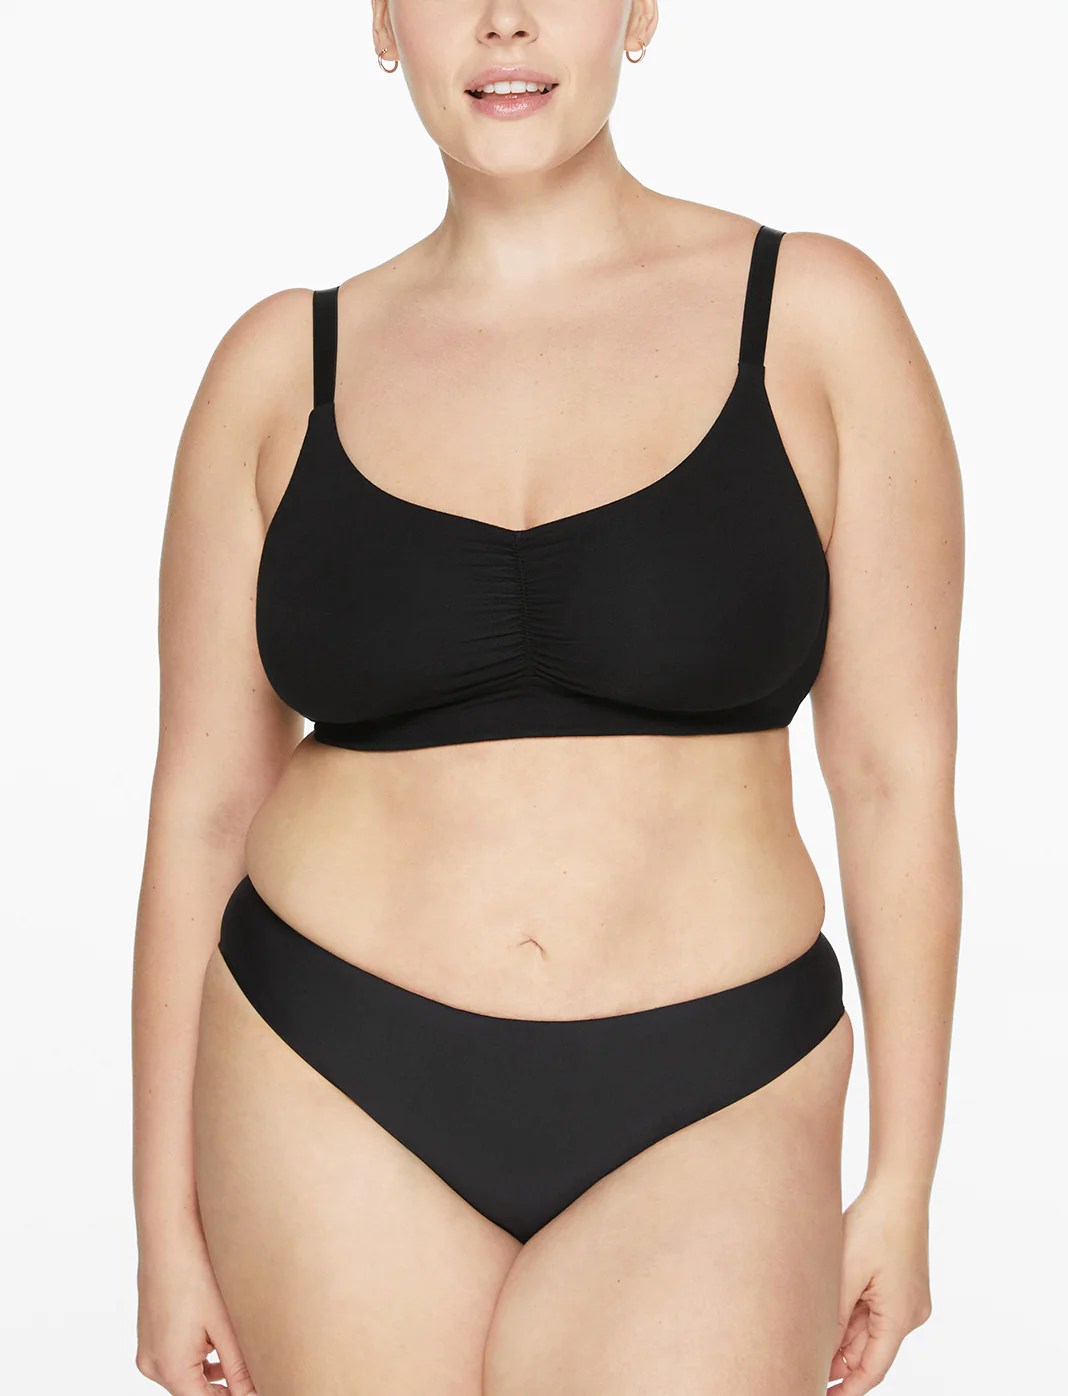 The Best Mastectomy Bras for Comfort & Style Post-Surgery